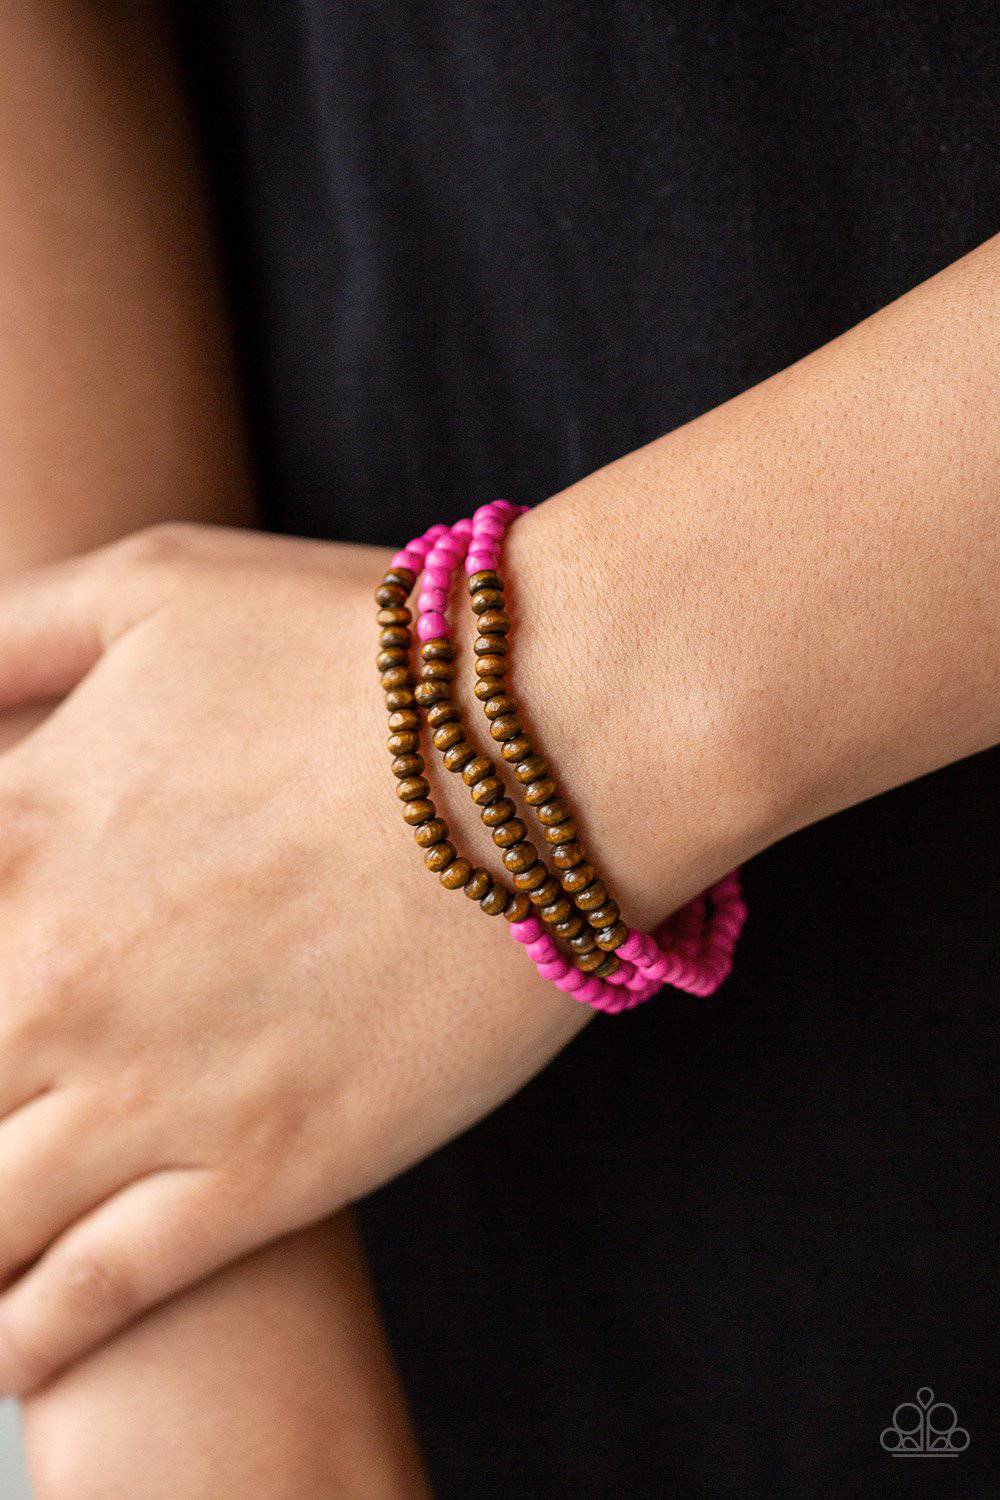 Woodland Wanderer - Pink and Wooden Bead Bracelet - Paparazzi Accessories - GlaMarous Titi Jewels